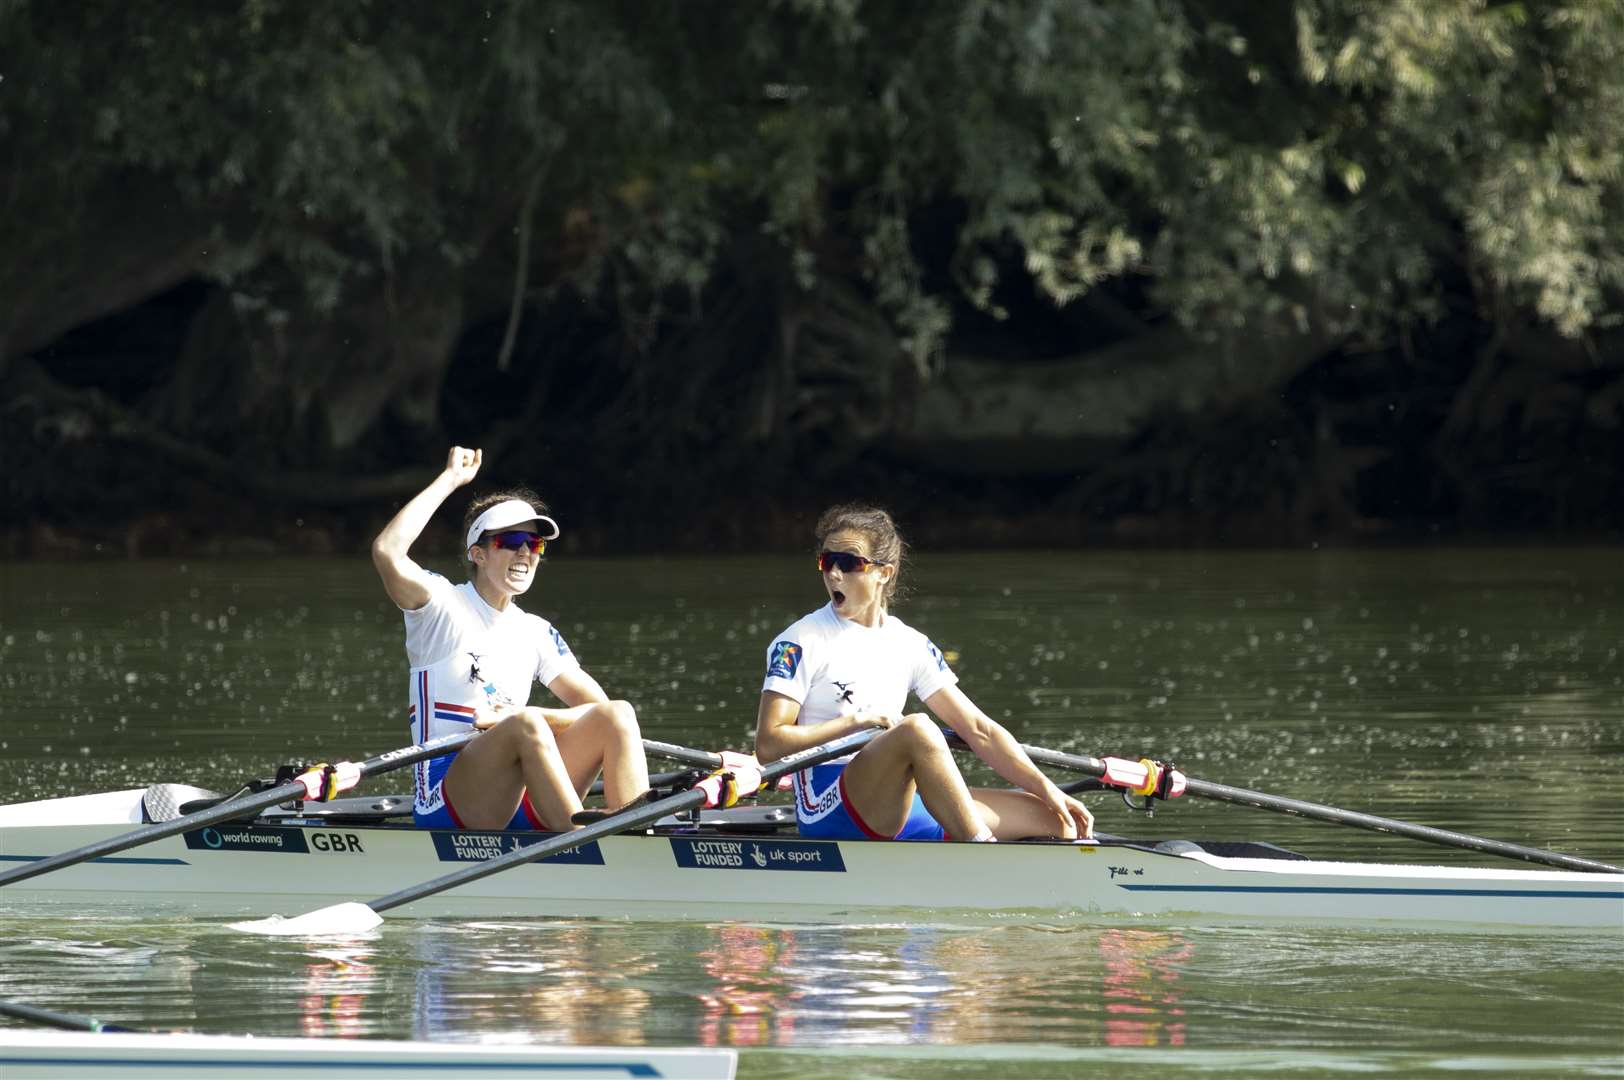 Imogen Grant, right, and Pembury's Emily Craig after winning the bronze medal in the lightweight women's double sculls at the World Rowing Championships in Austria. They will row again together at Tokyo. Picture: Nick Middleton